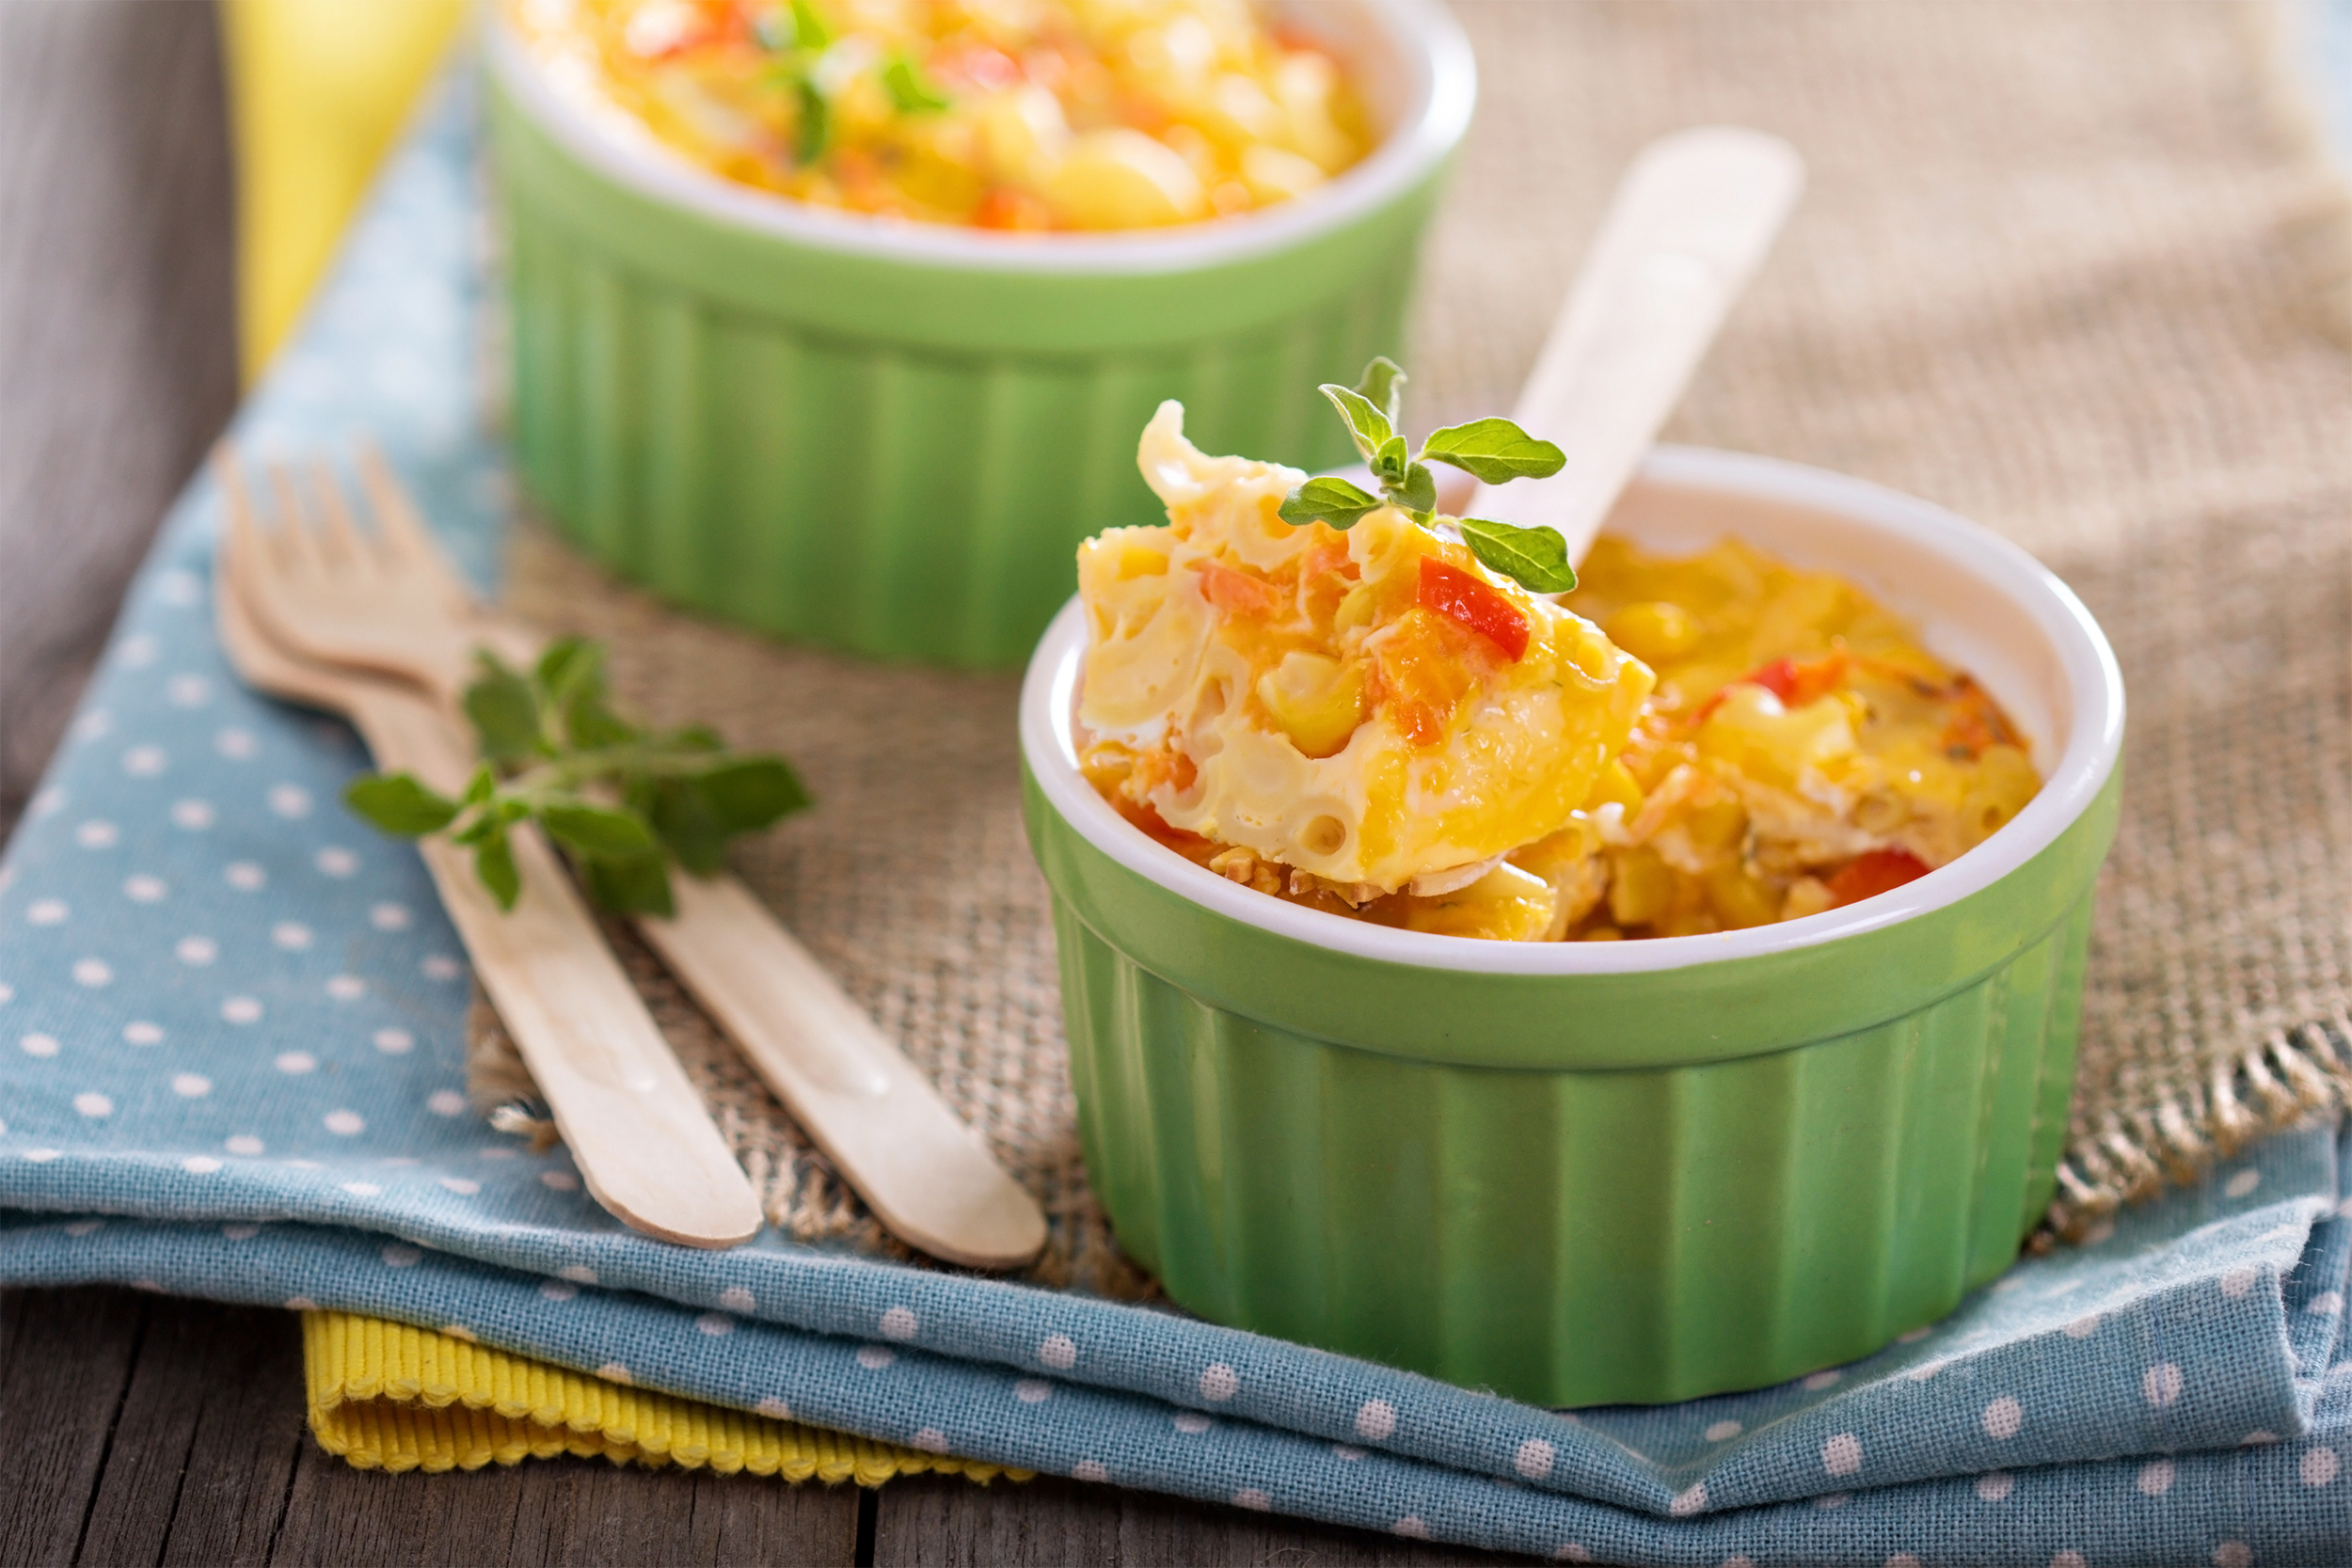 <p>If you coat a mug or ramekin with cooking spray and drop in egg with whatever items you'd enjoy in an omelet or on a dish — frozen shredded hash browns, cheese, tomato or salsa, spinach — you have an efficient meal ready to zap in the <a href="https://reviews.cheapism.com/cheap-microwave-ovens/">microwave</a>. Beat slightly to blend ingredients; microwave on high for 30 seconds; stir; and give the dish another 30 seconds of microwaving, give or take, so the egg sets. Experiment with ingredients and toppings.</p>